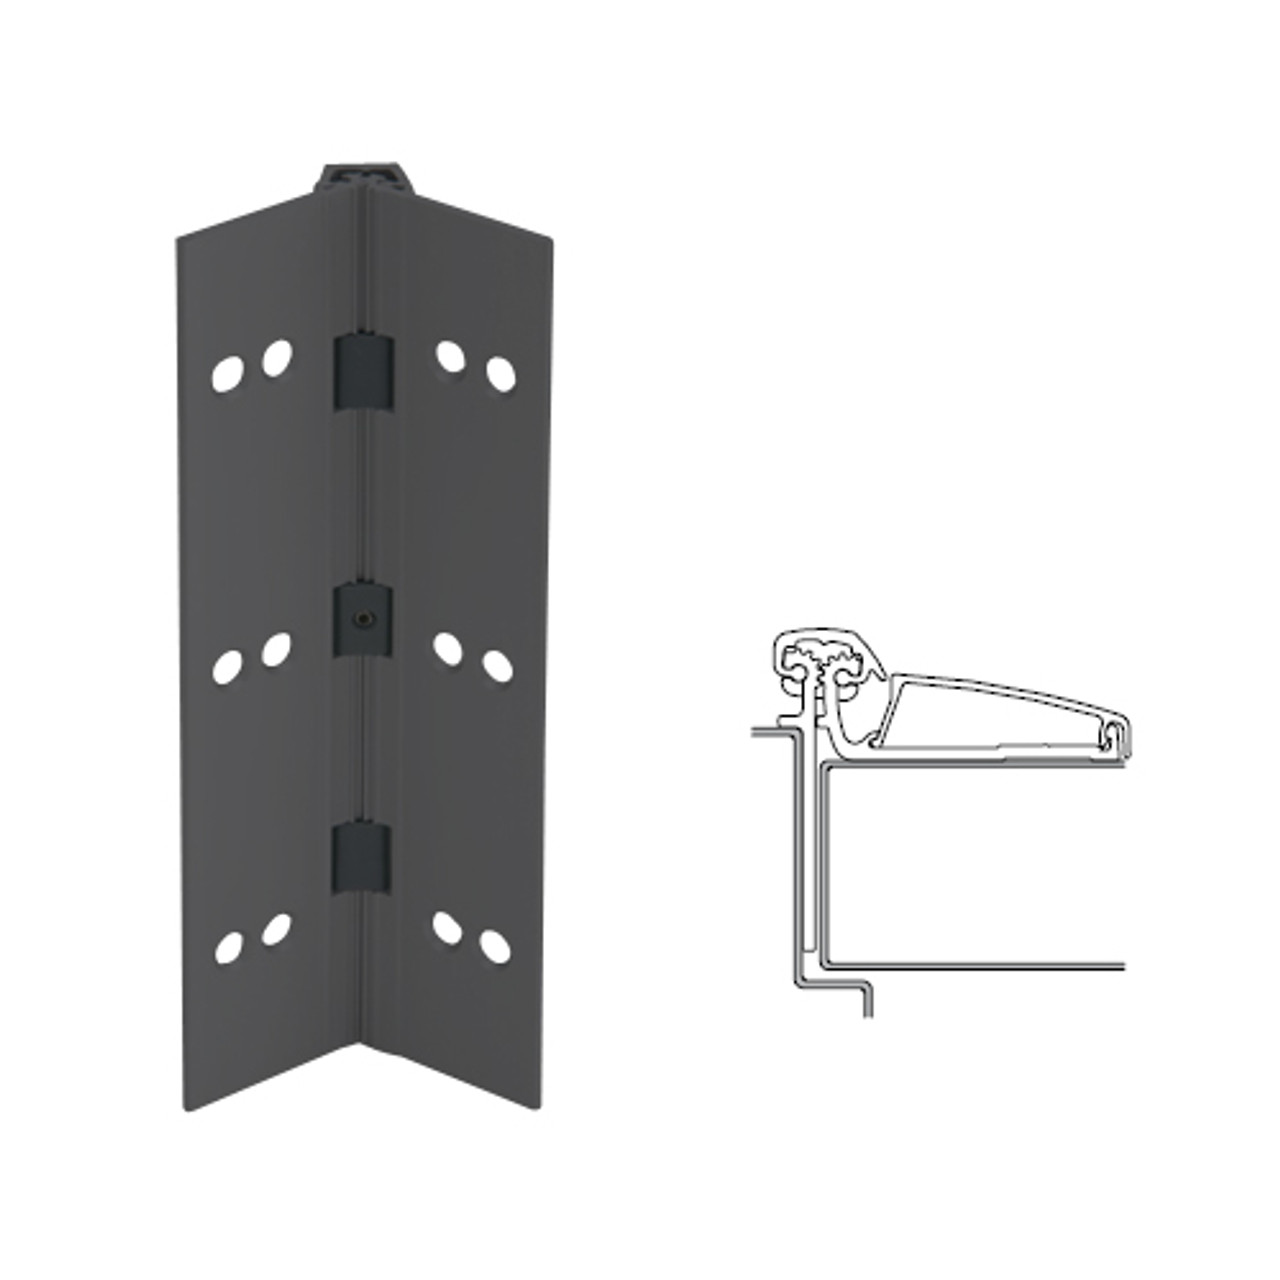 046XY-315AN-83-SECWDHM IVES Adjustable Half Surface Continuous Geared Hinges with Security Screws - Hex Pin Drive in Anodized Black